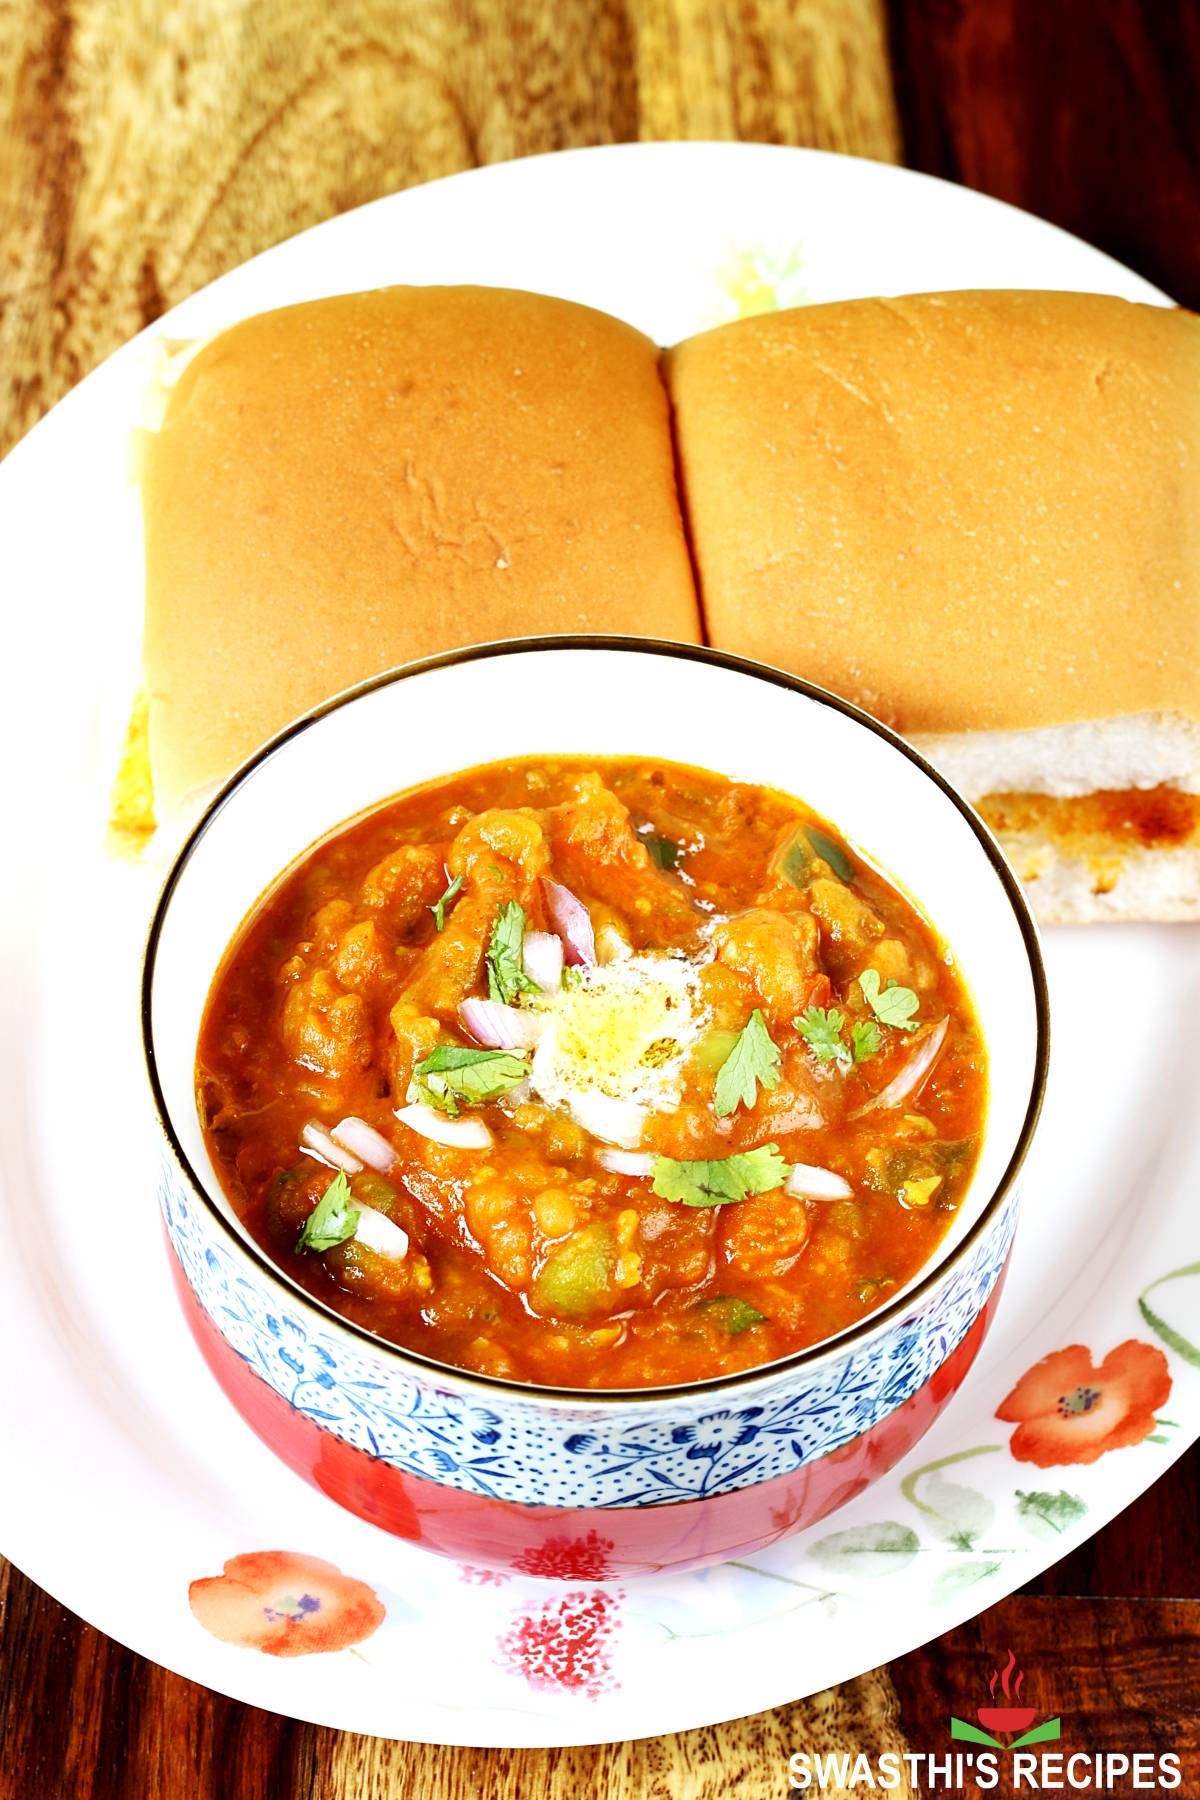 Pav bhaji made with mixed vegetables, spices and butter